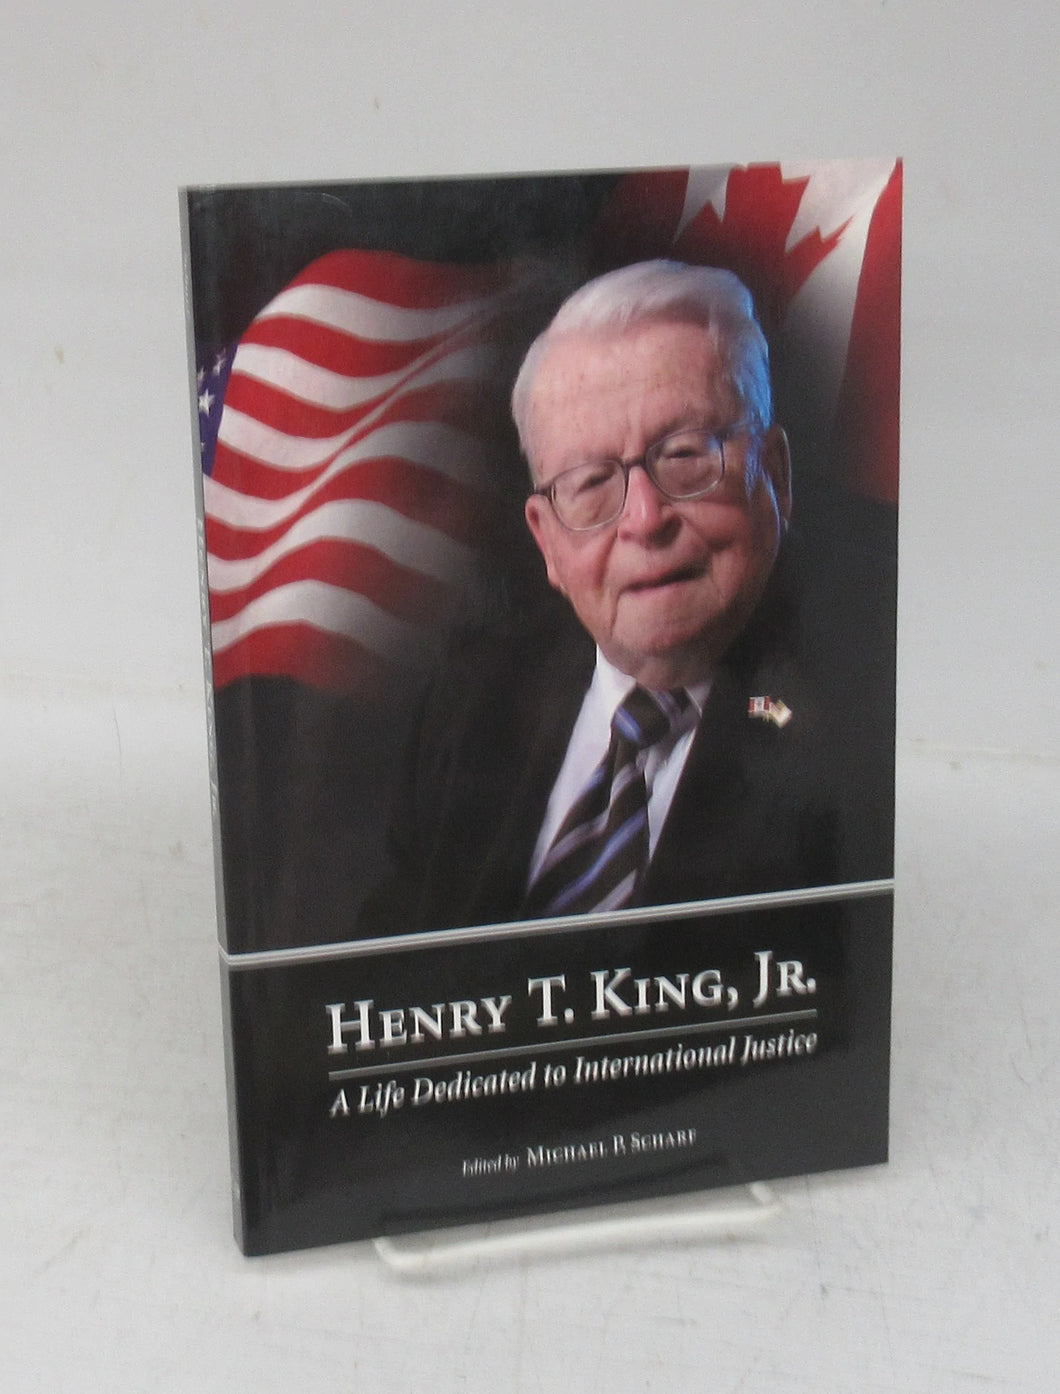 Henry T. King, Jr.: A Life Dedicated to International Justice